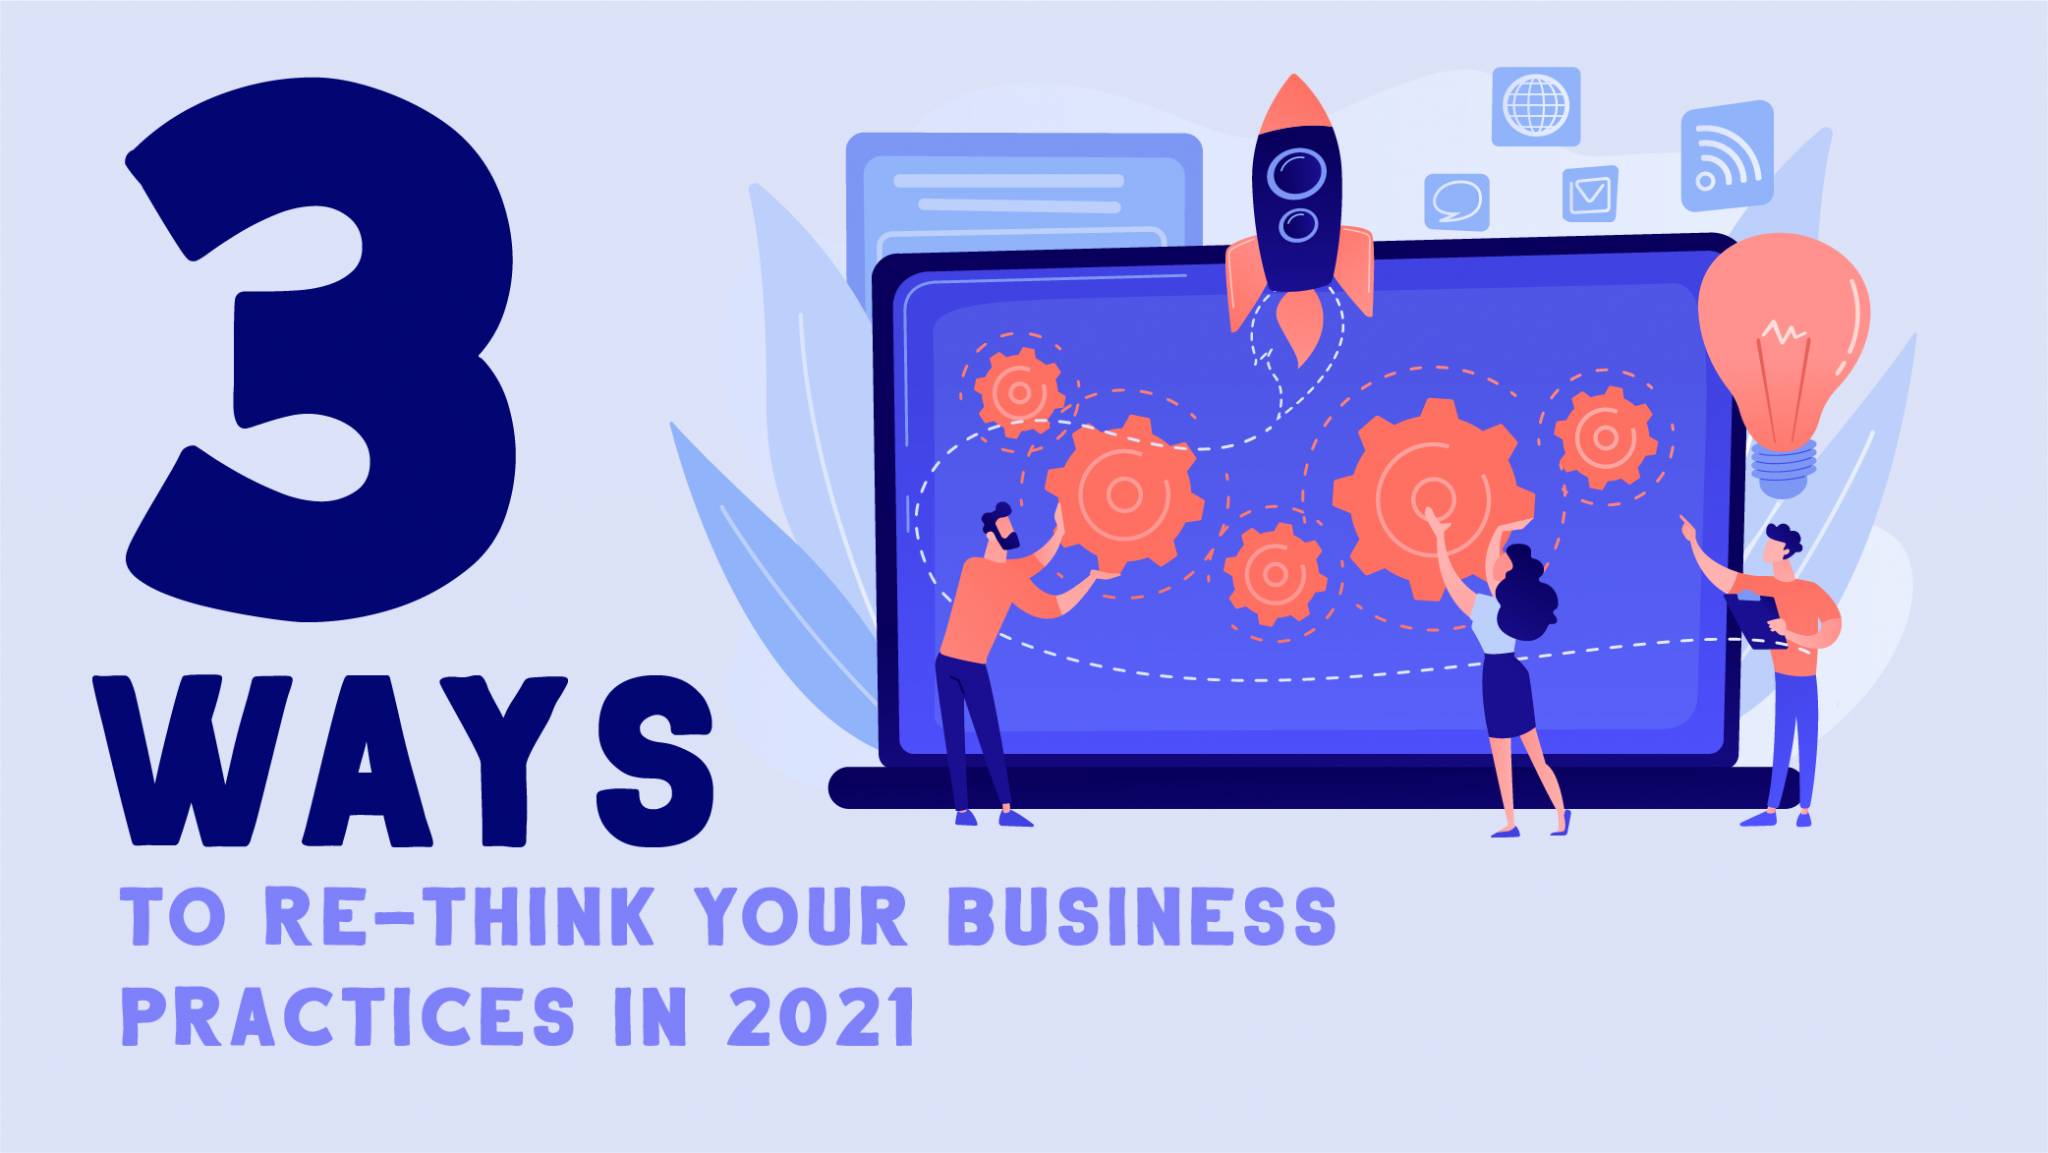 3 Ways to Re-think Your Business Practices in 2021